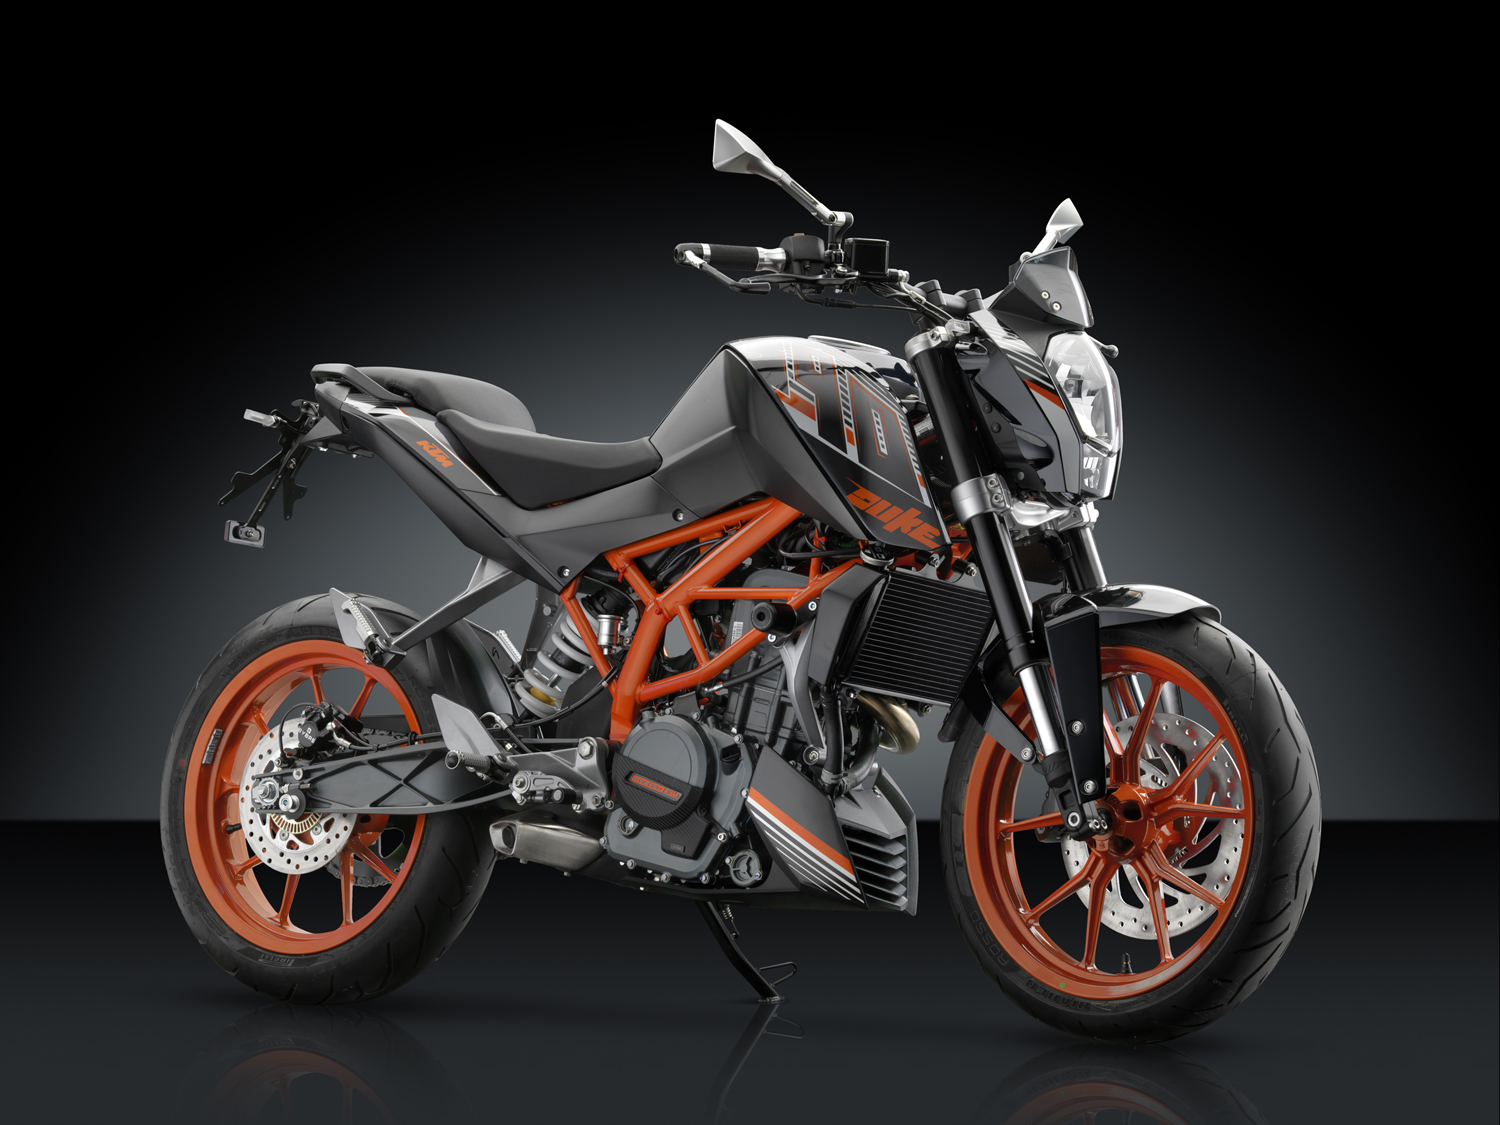 Accessorize Your KTM 390 and Duke With Rizoma Products | Cycle World